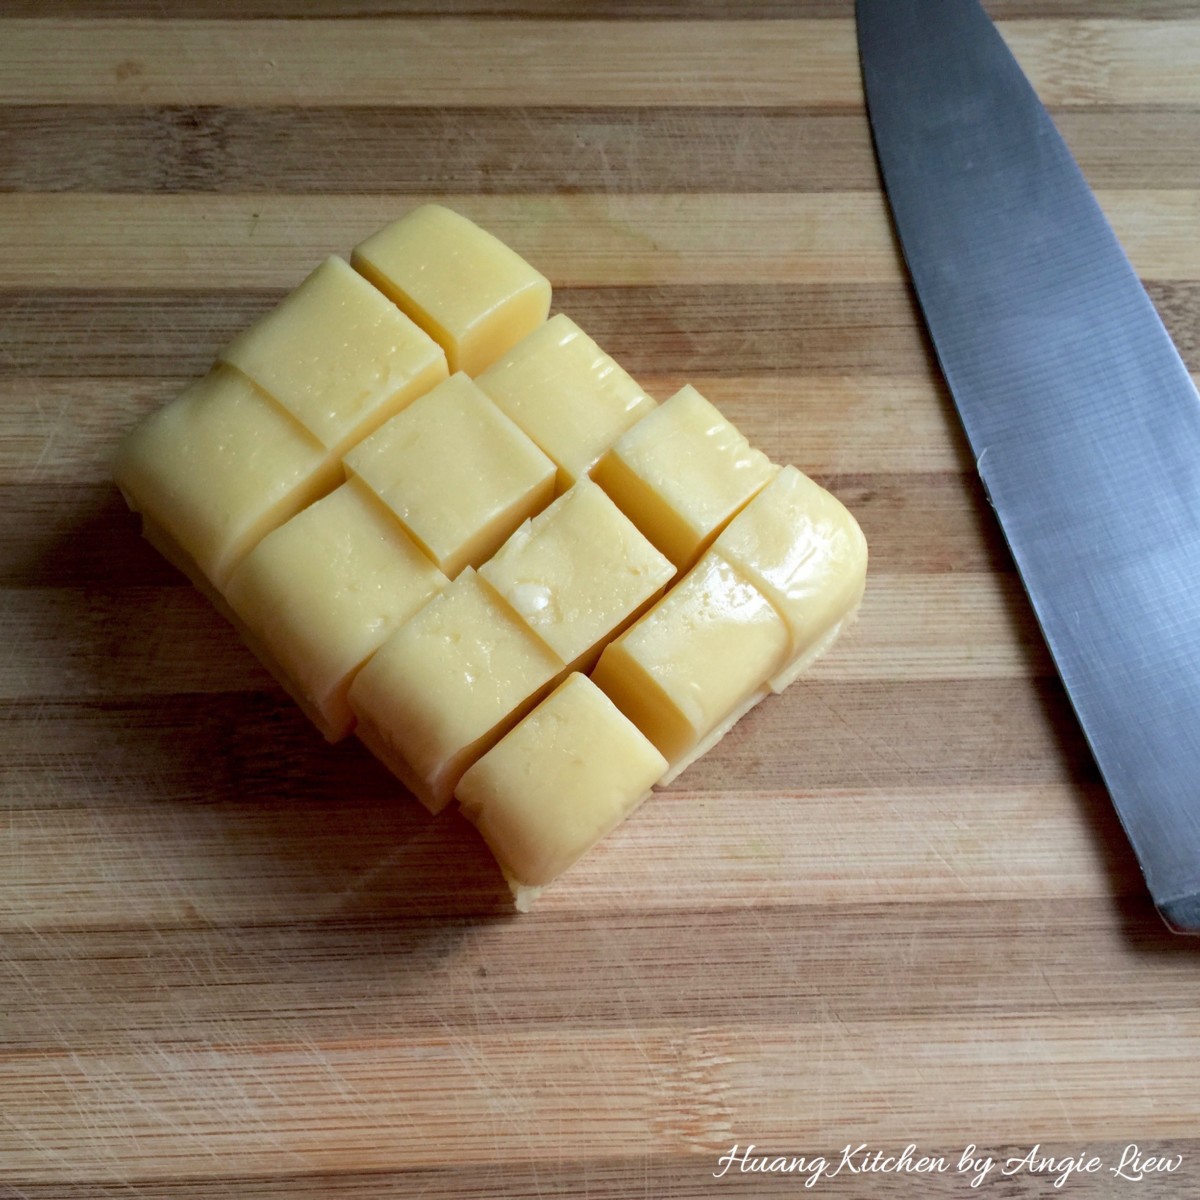 Cut cheese into 1 inch cube.